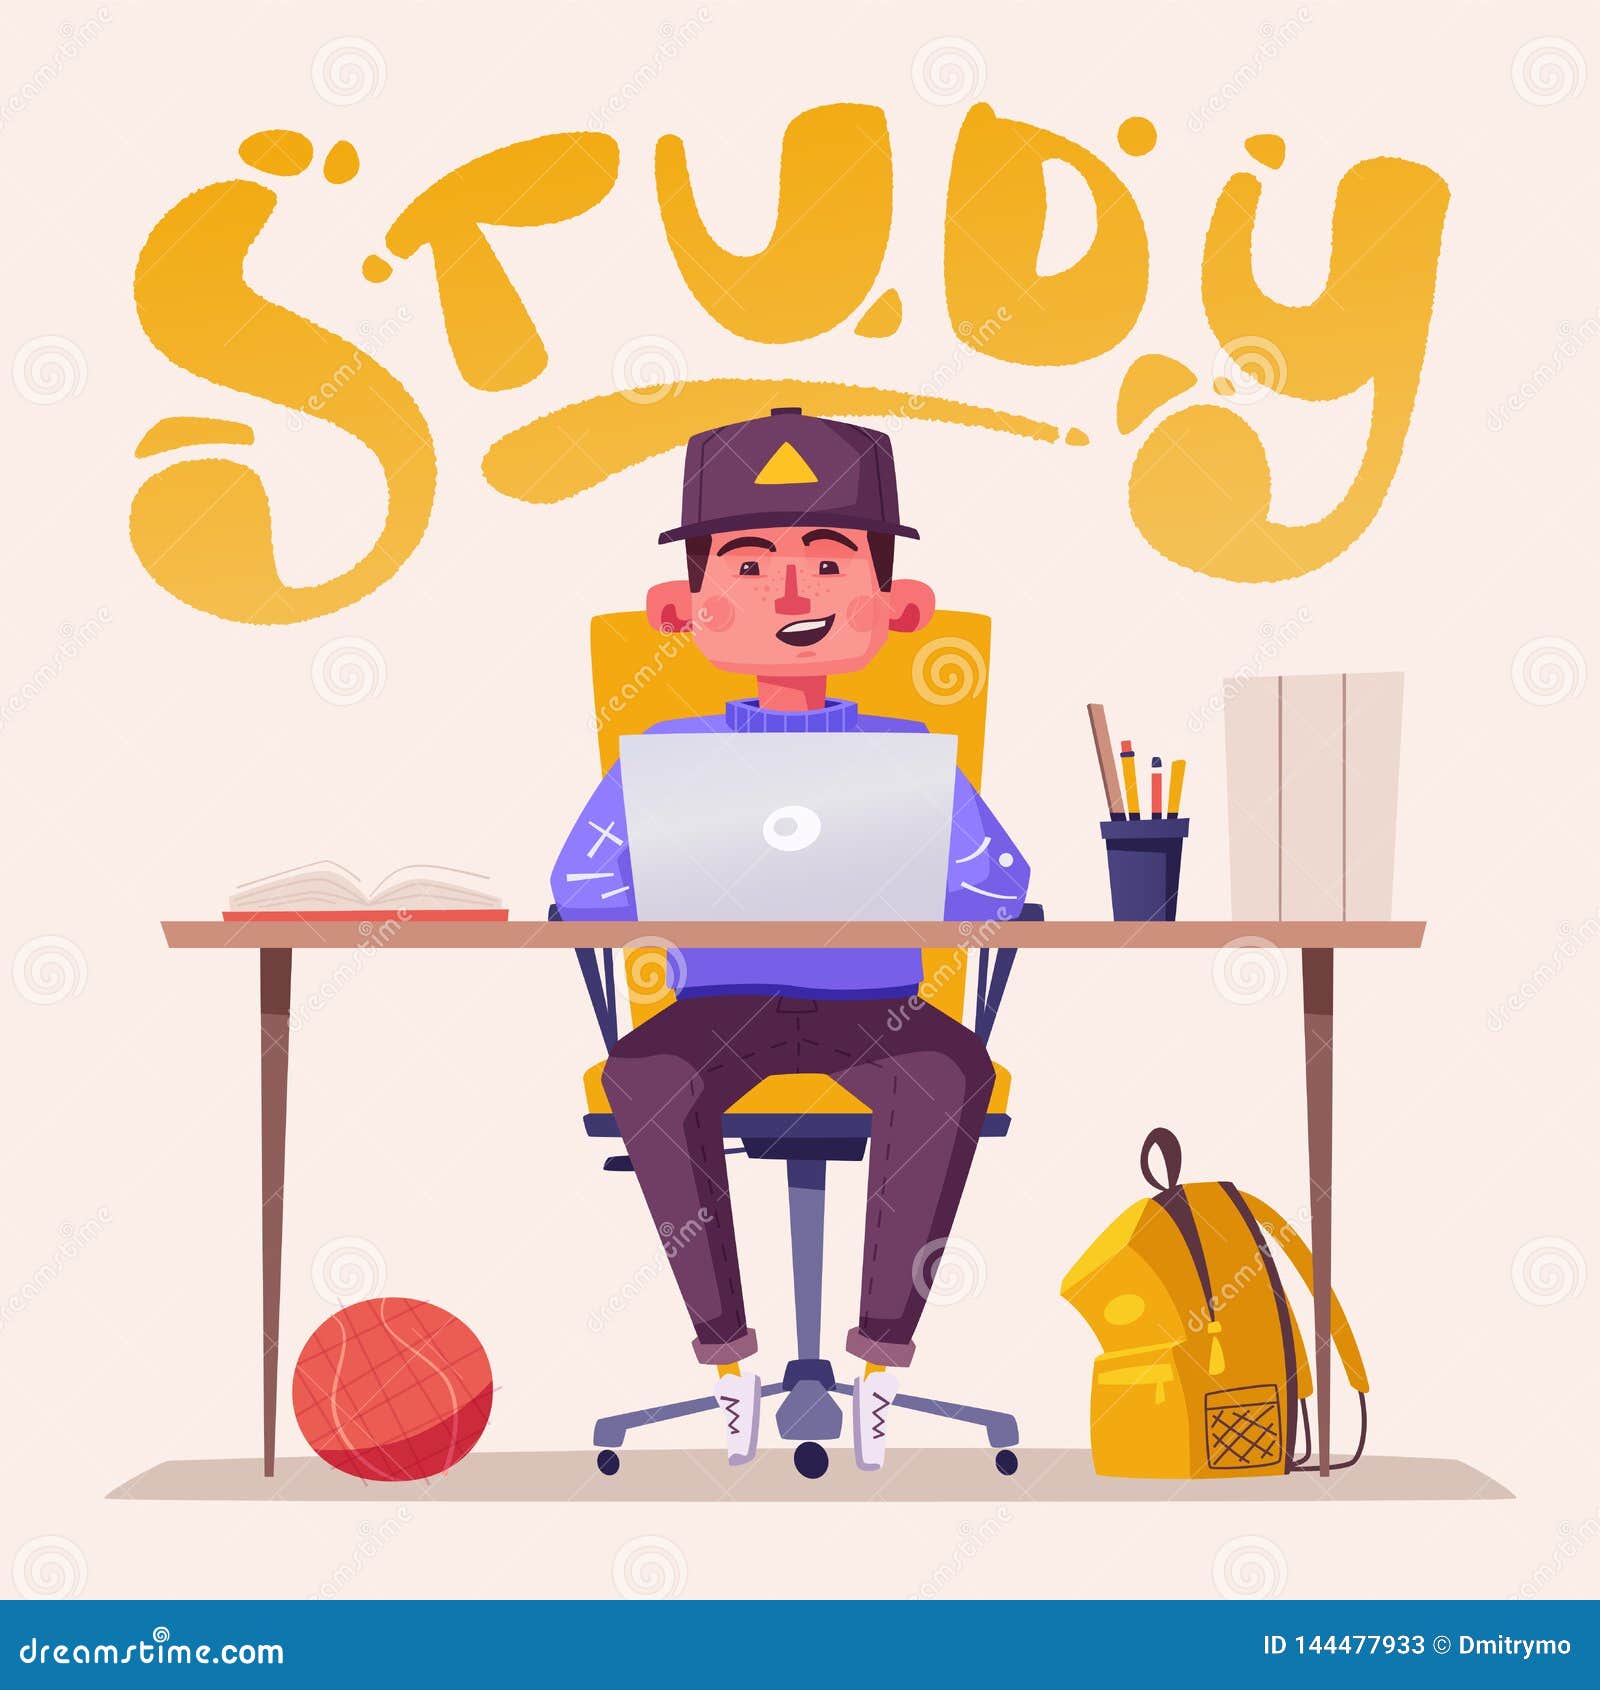 Student or Schoolboy Studying at the Computer. Cartoon Vector Illustration  Stock Vector - Illustration of funny, isolated: 144477933